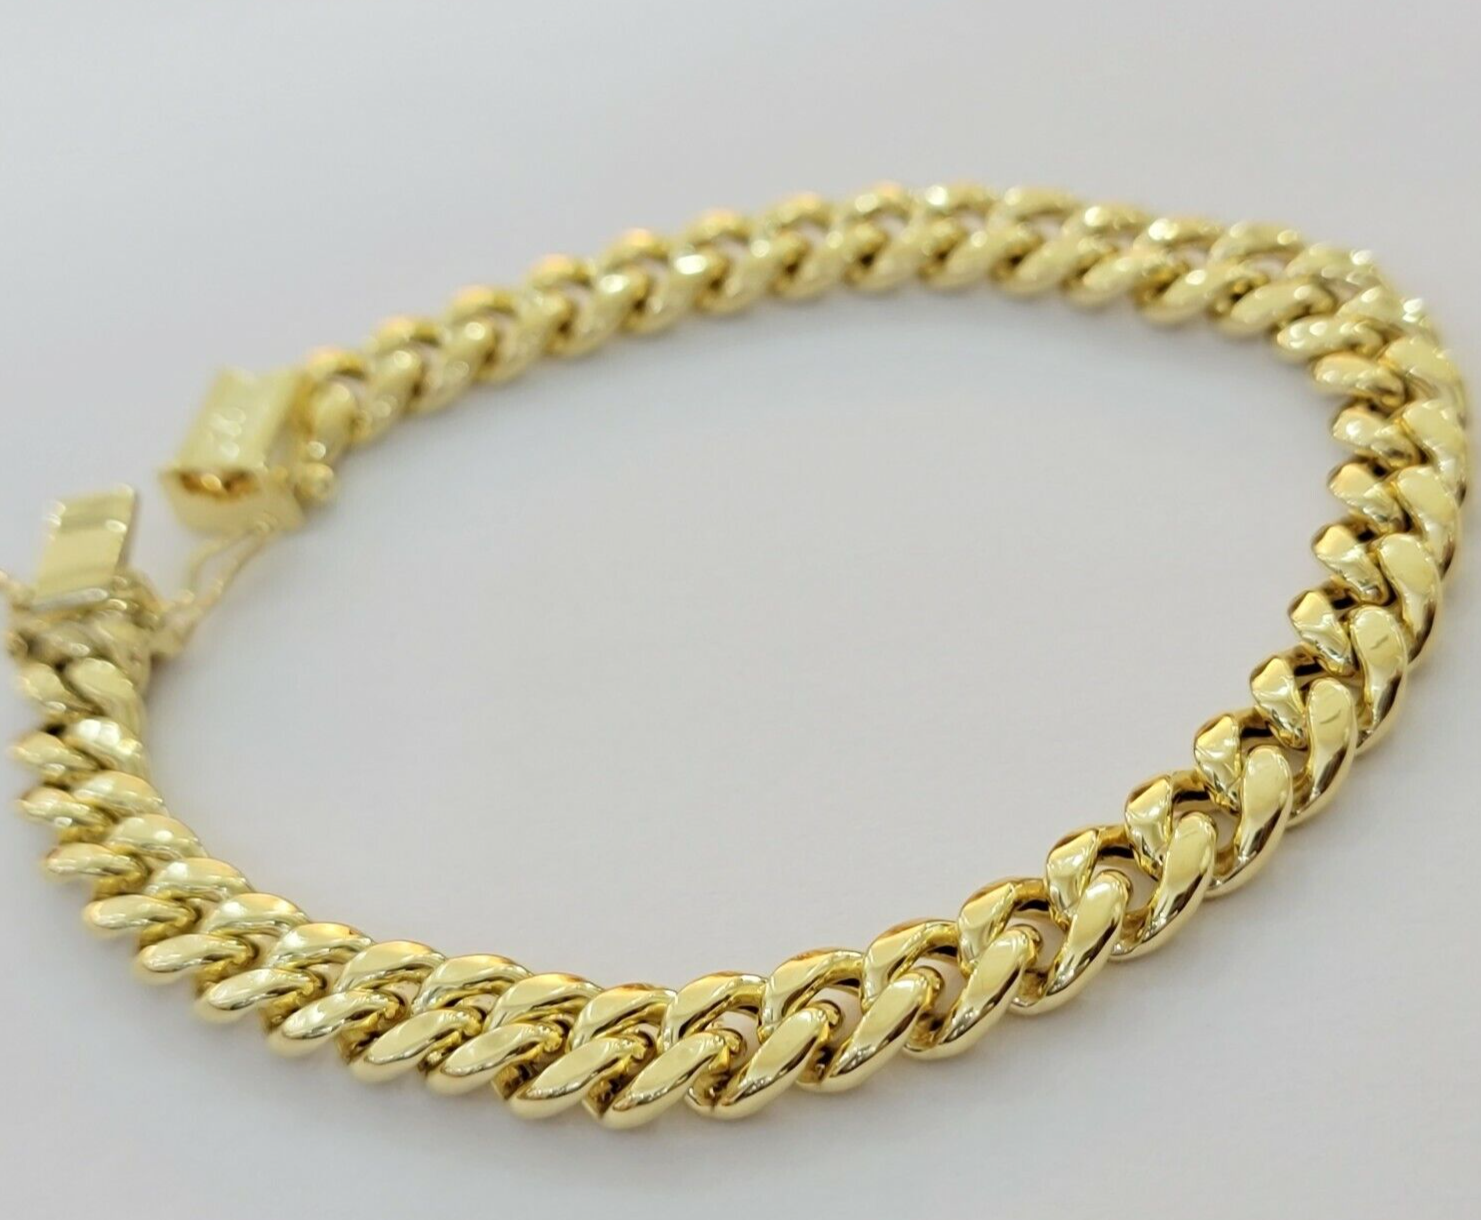 Mens Real 14k Gold Bracelet 8mm 8 inch Miami Cuban Link Box Clasp Strong 14 KT